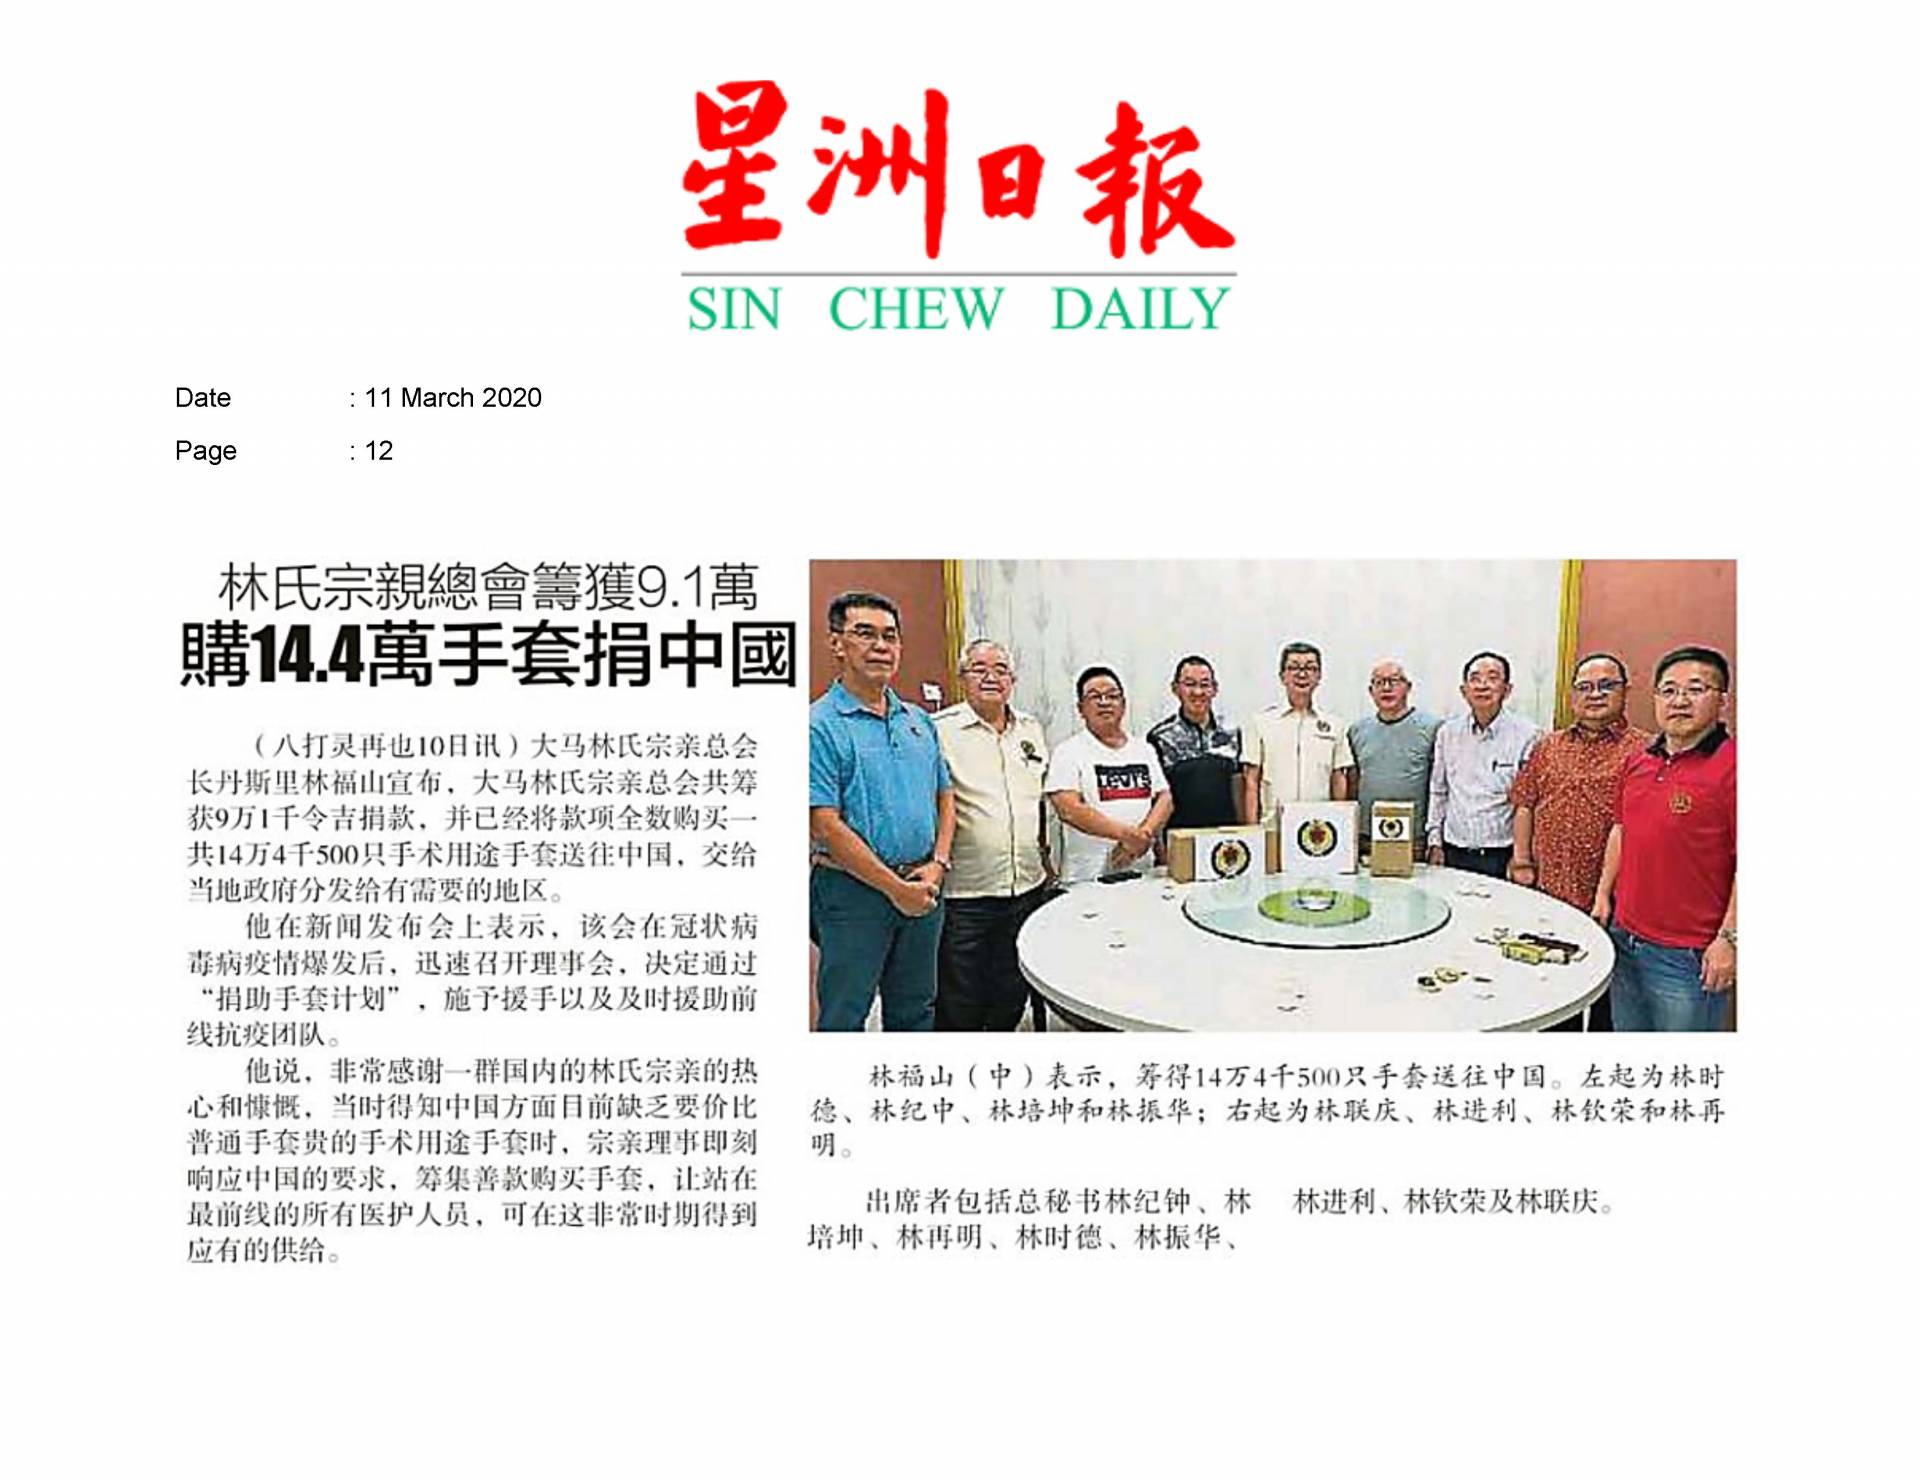 2020.03.11 Sin Chew - The Federation of Malaysia Lim Associations raises RM91,000 funds to purchase 144,000 gloves and donate them to China